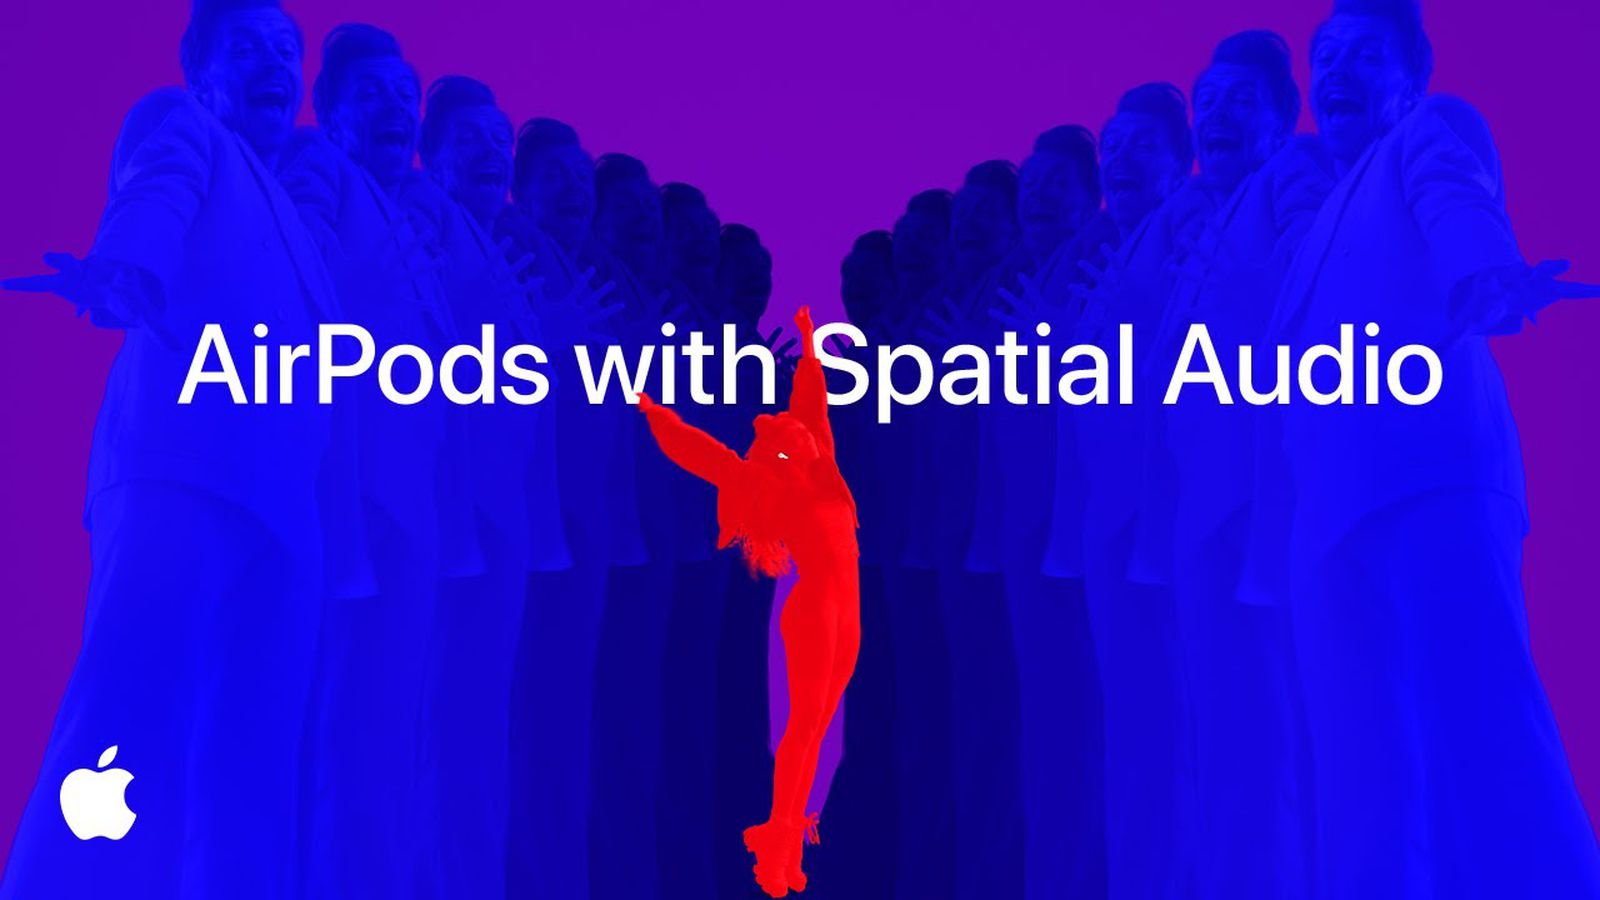 Apple Highlights Spatial Audio on AirPods in Colorful New Ad Starring Harry Styles - macrumors.com